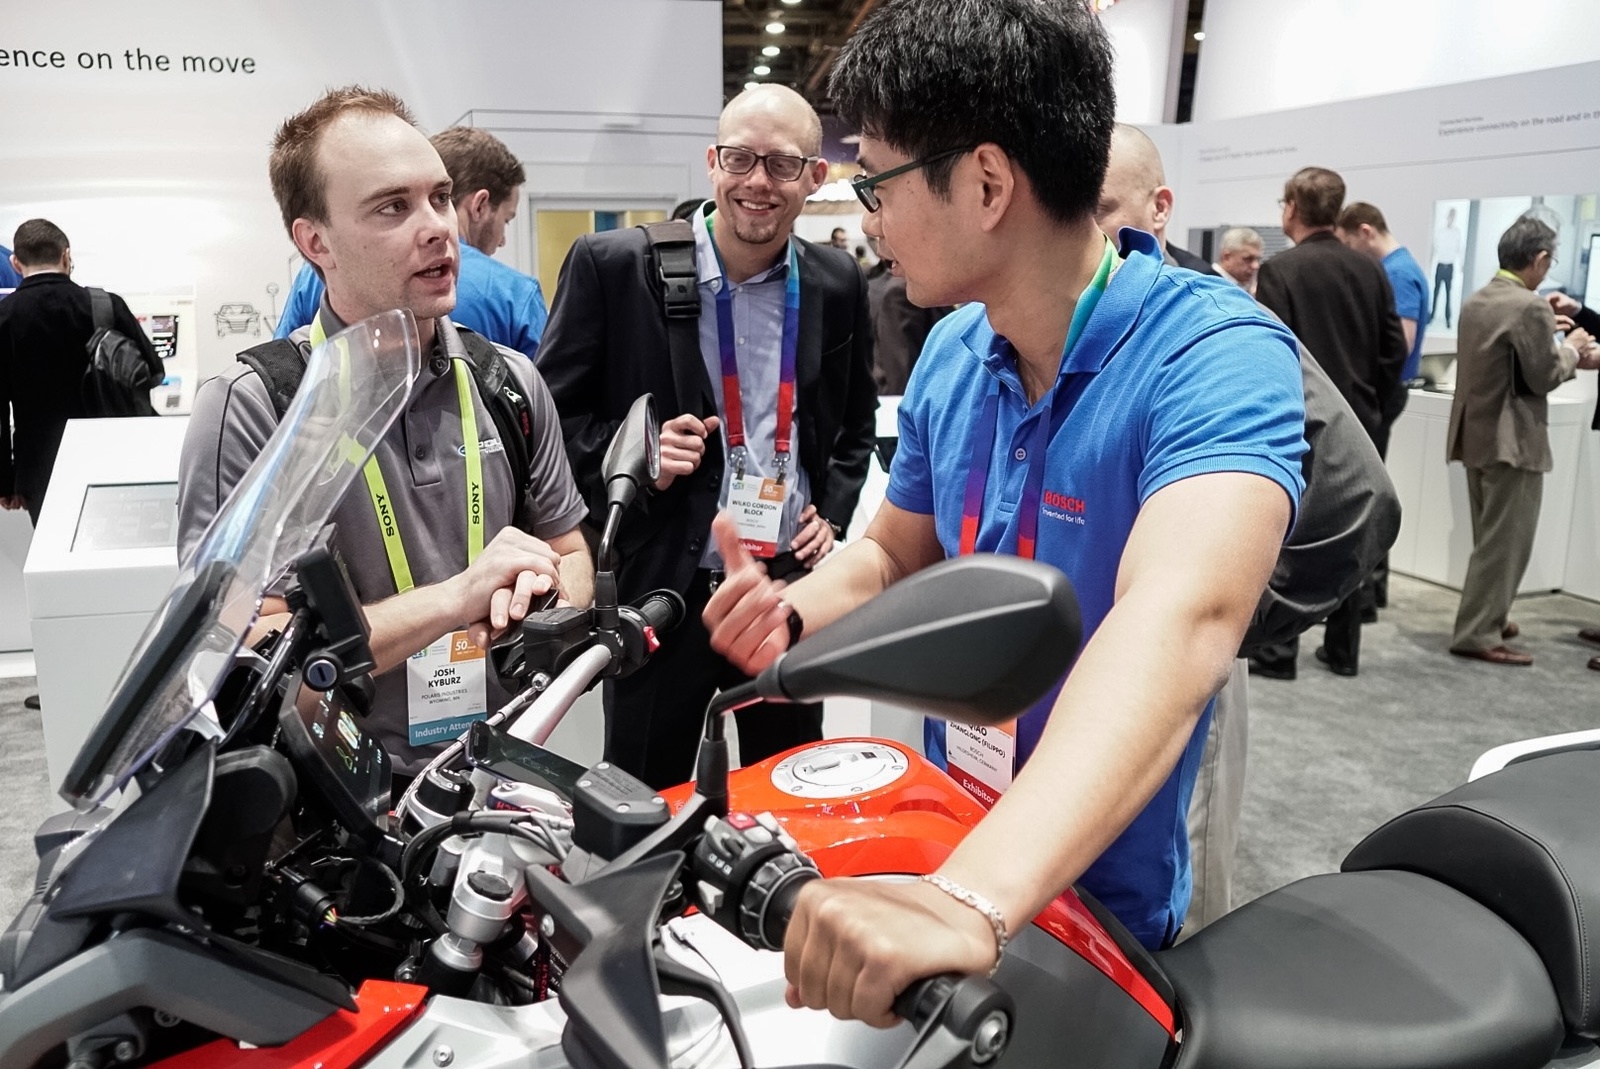 Bosch at CES 2017: Four CES Innovation Awards for Bosch motorcycle solutions